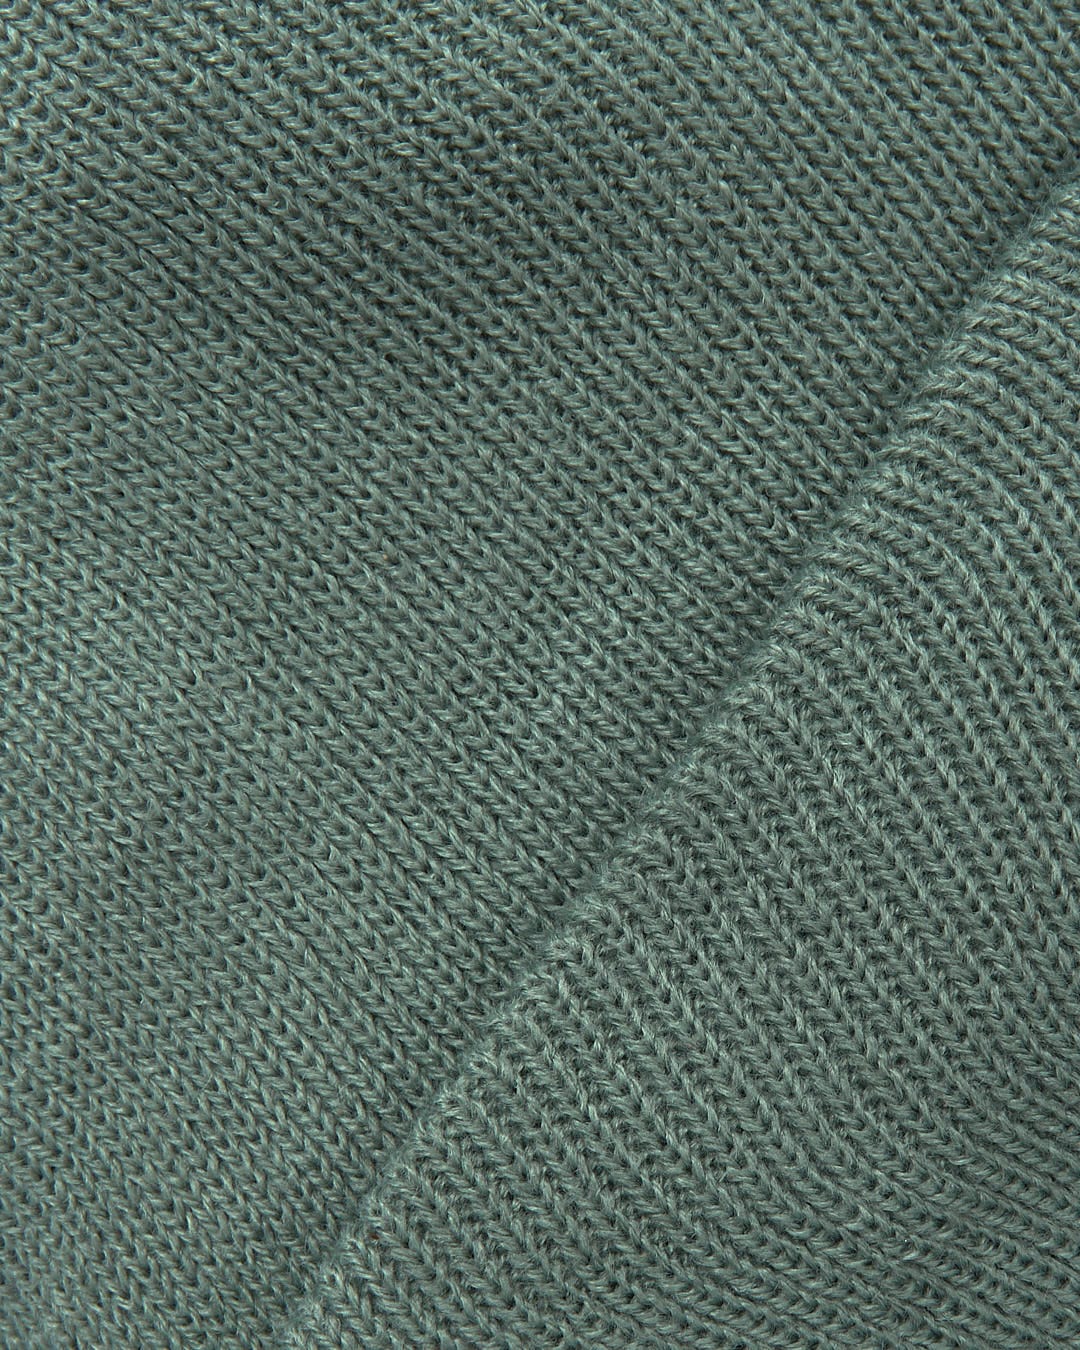 A close up image of a Saltrock Ok - Tight Knit Beanie - Light Green fabric.